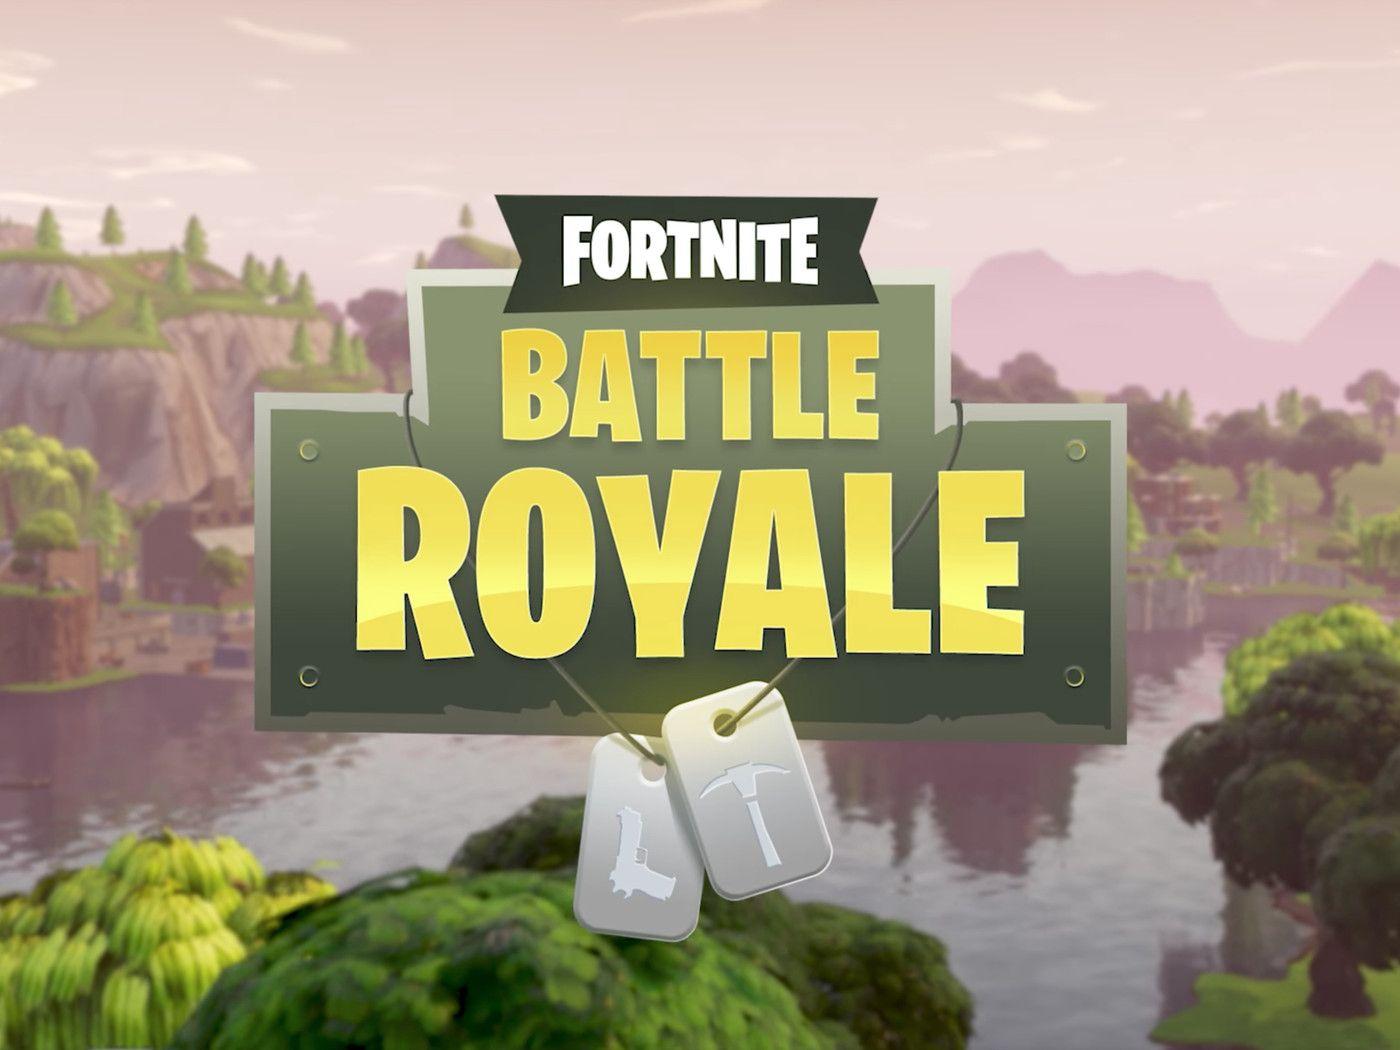 PUBG creators are unhappy with Fortnite: Battle Royale, considering